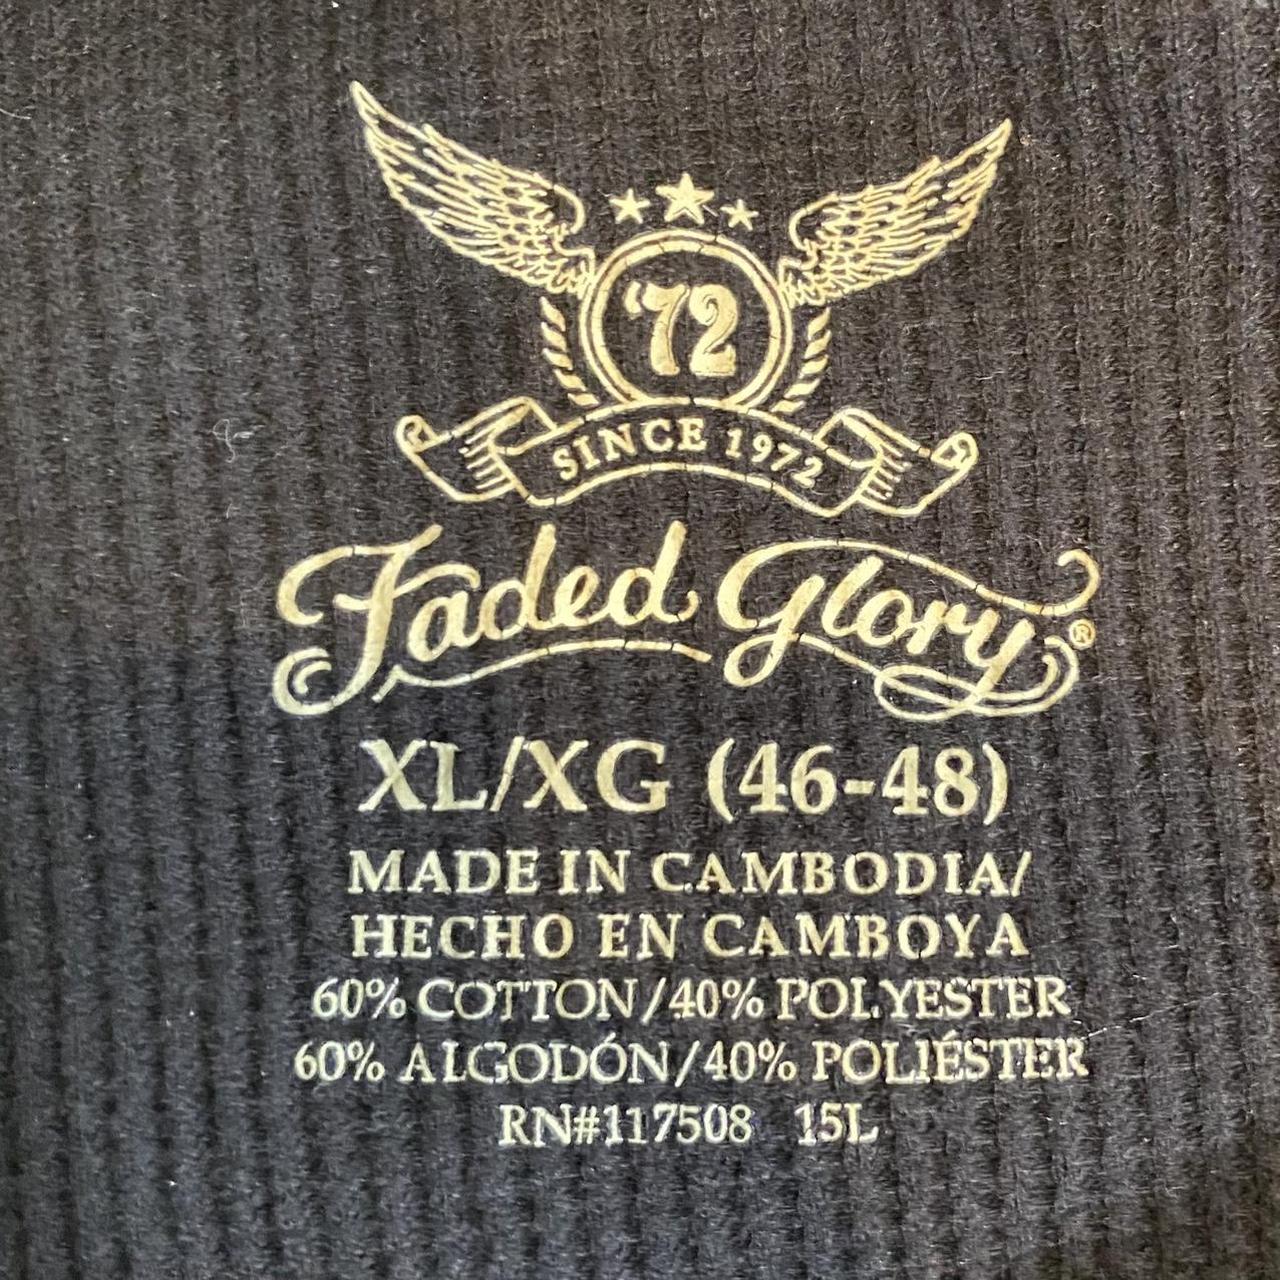 Faded Glory Men's Black and Green T-shirt (4)